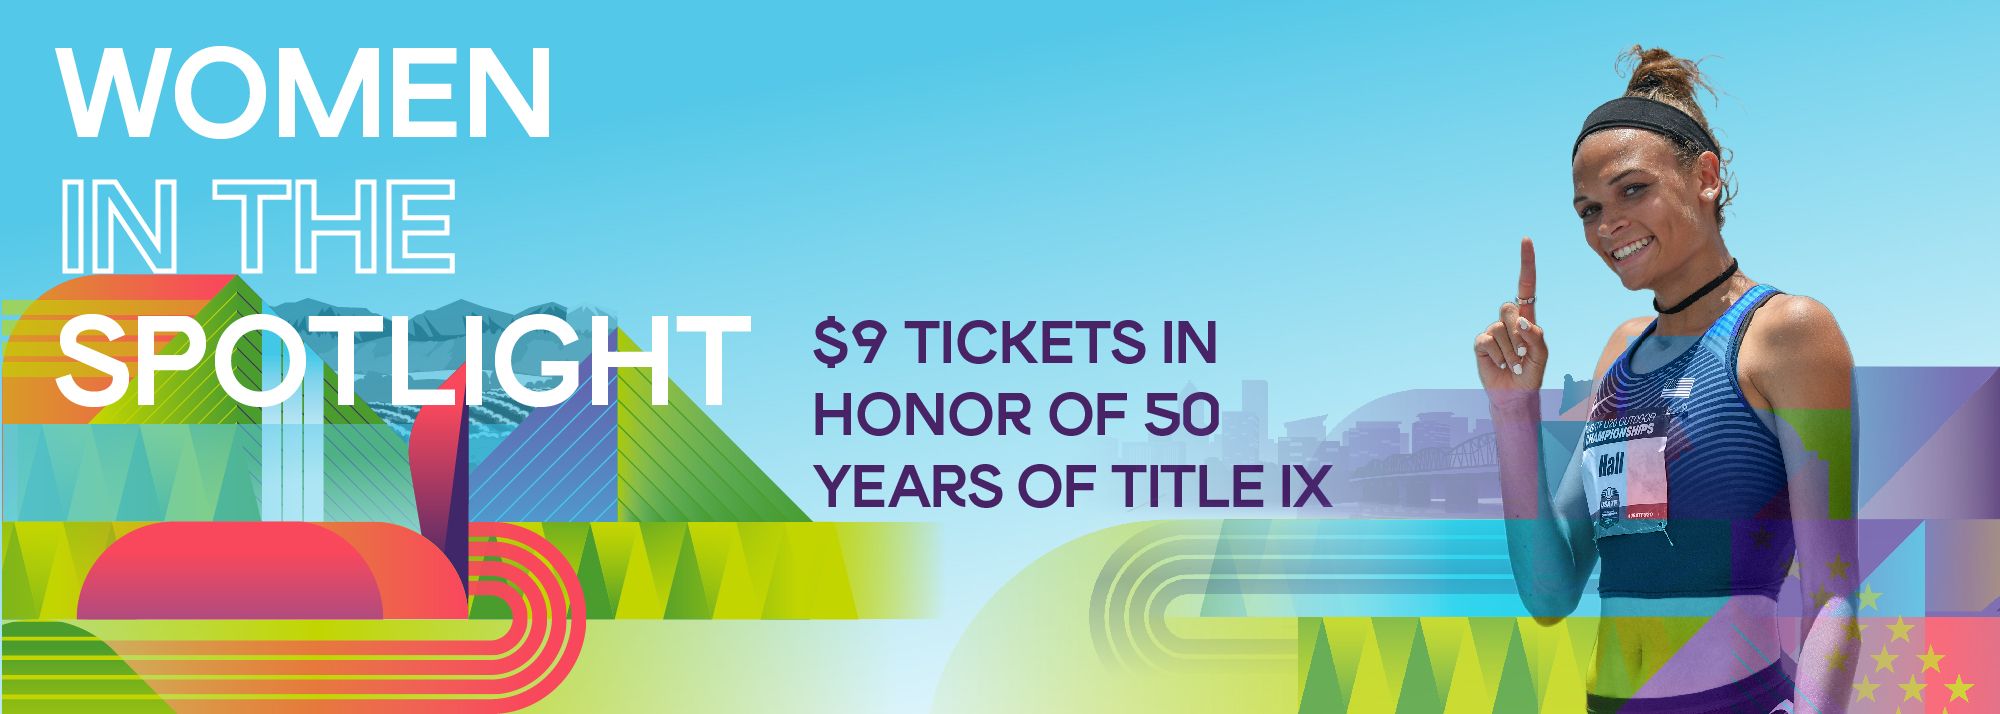 In honor of the 50th anniversary of Title IX, we are proud to offer $9 tickets to the July 18 morning session of the WCH Oregon22!